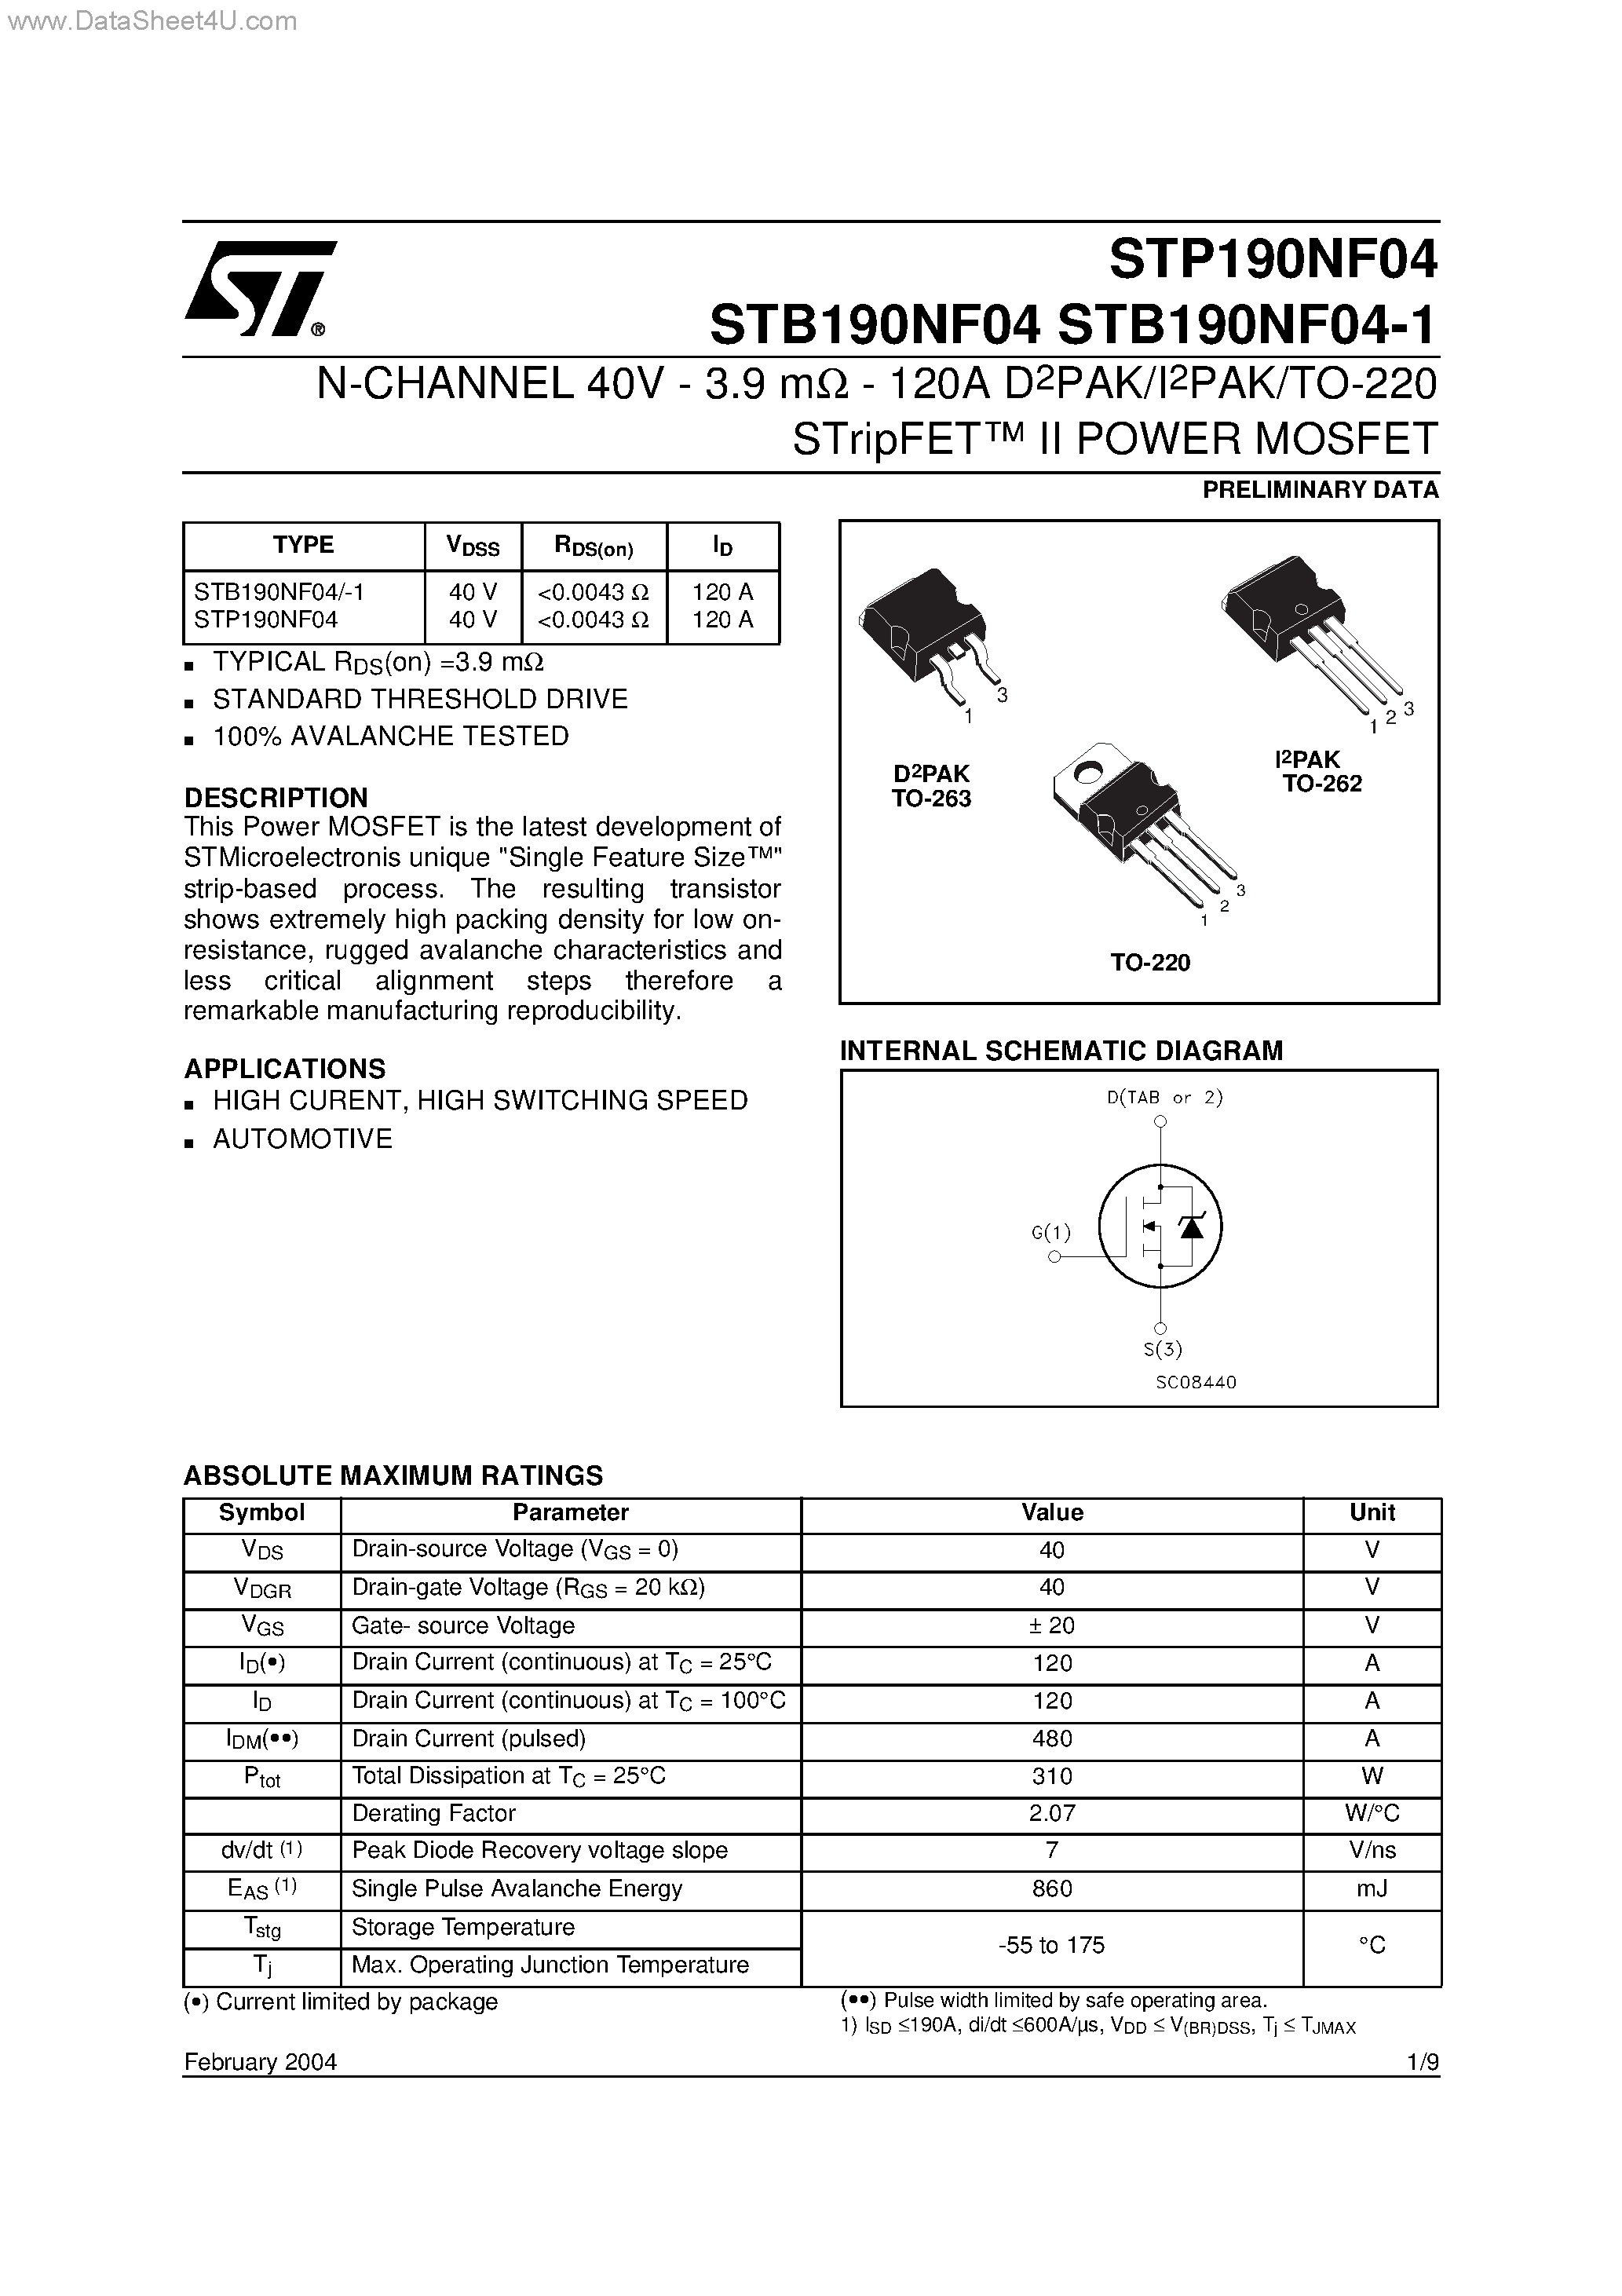 Даташит STP190NF04 - N-CHANNEL POWER MOSFET страница 1